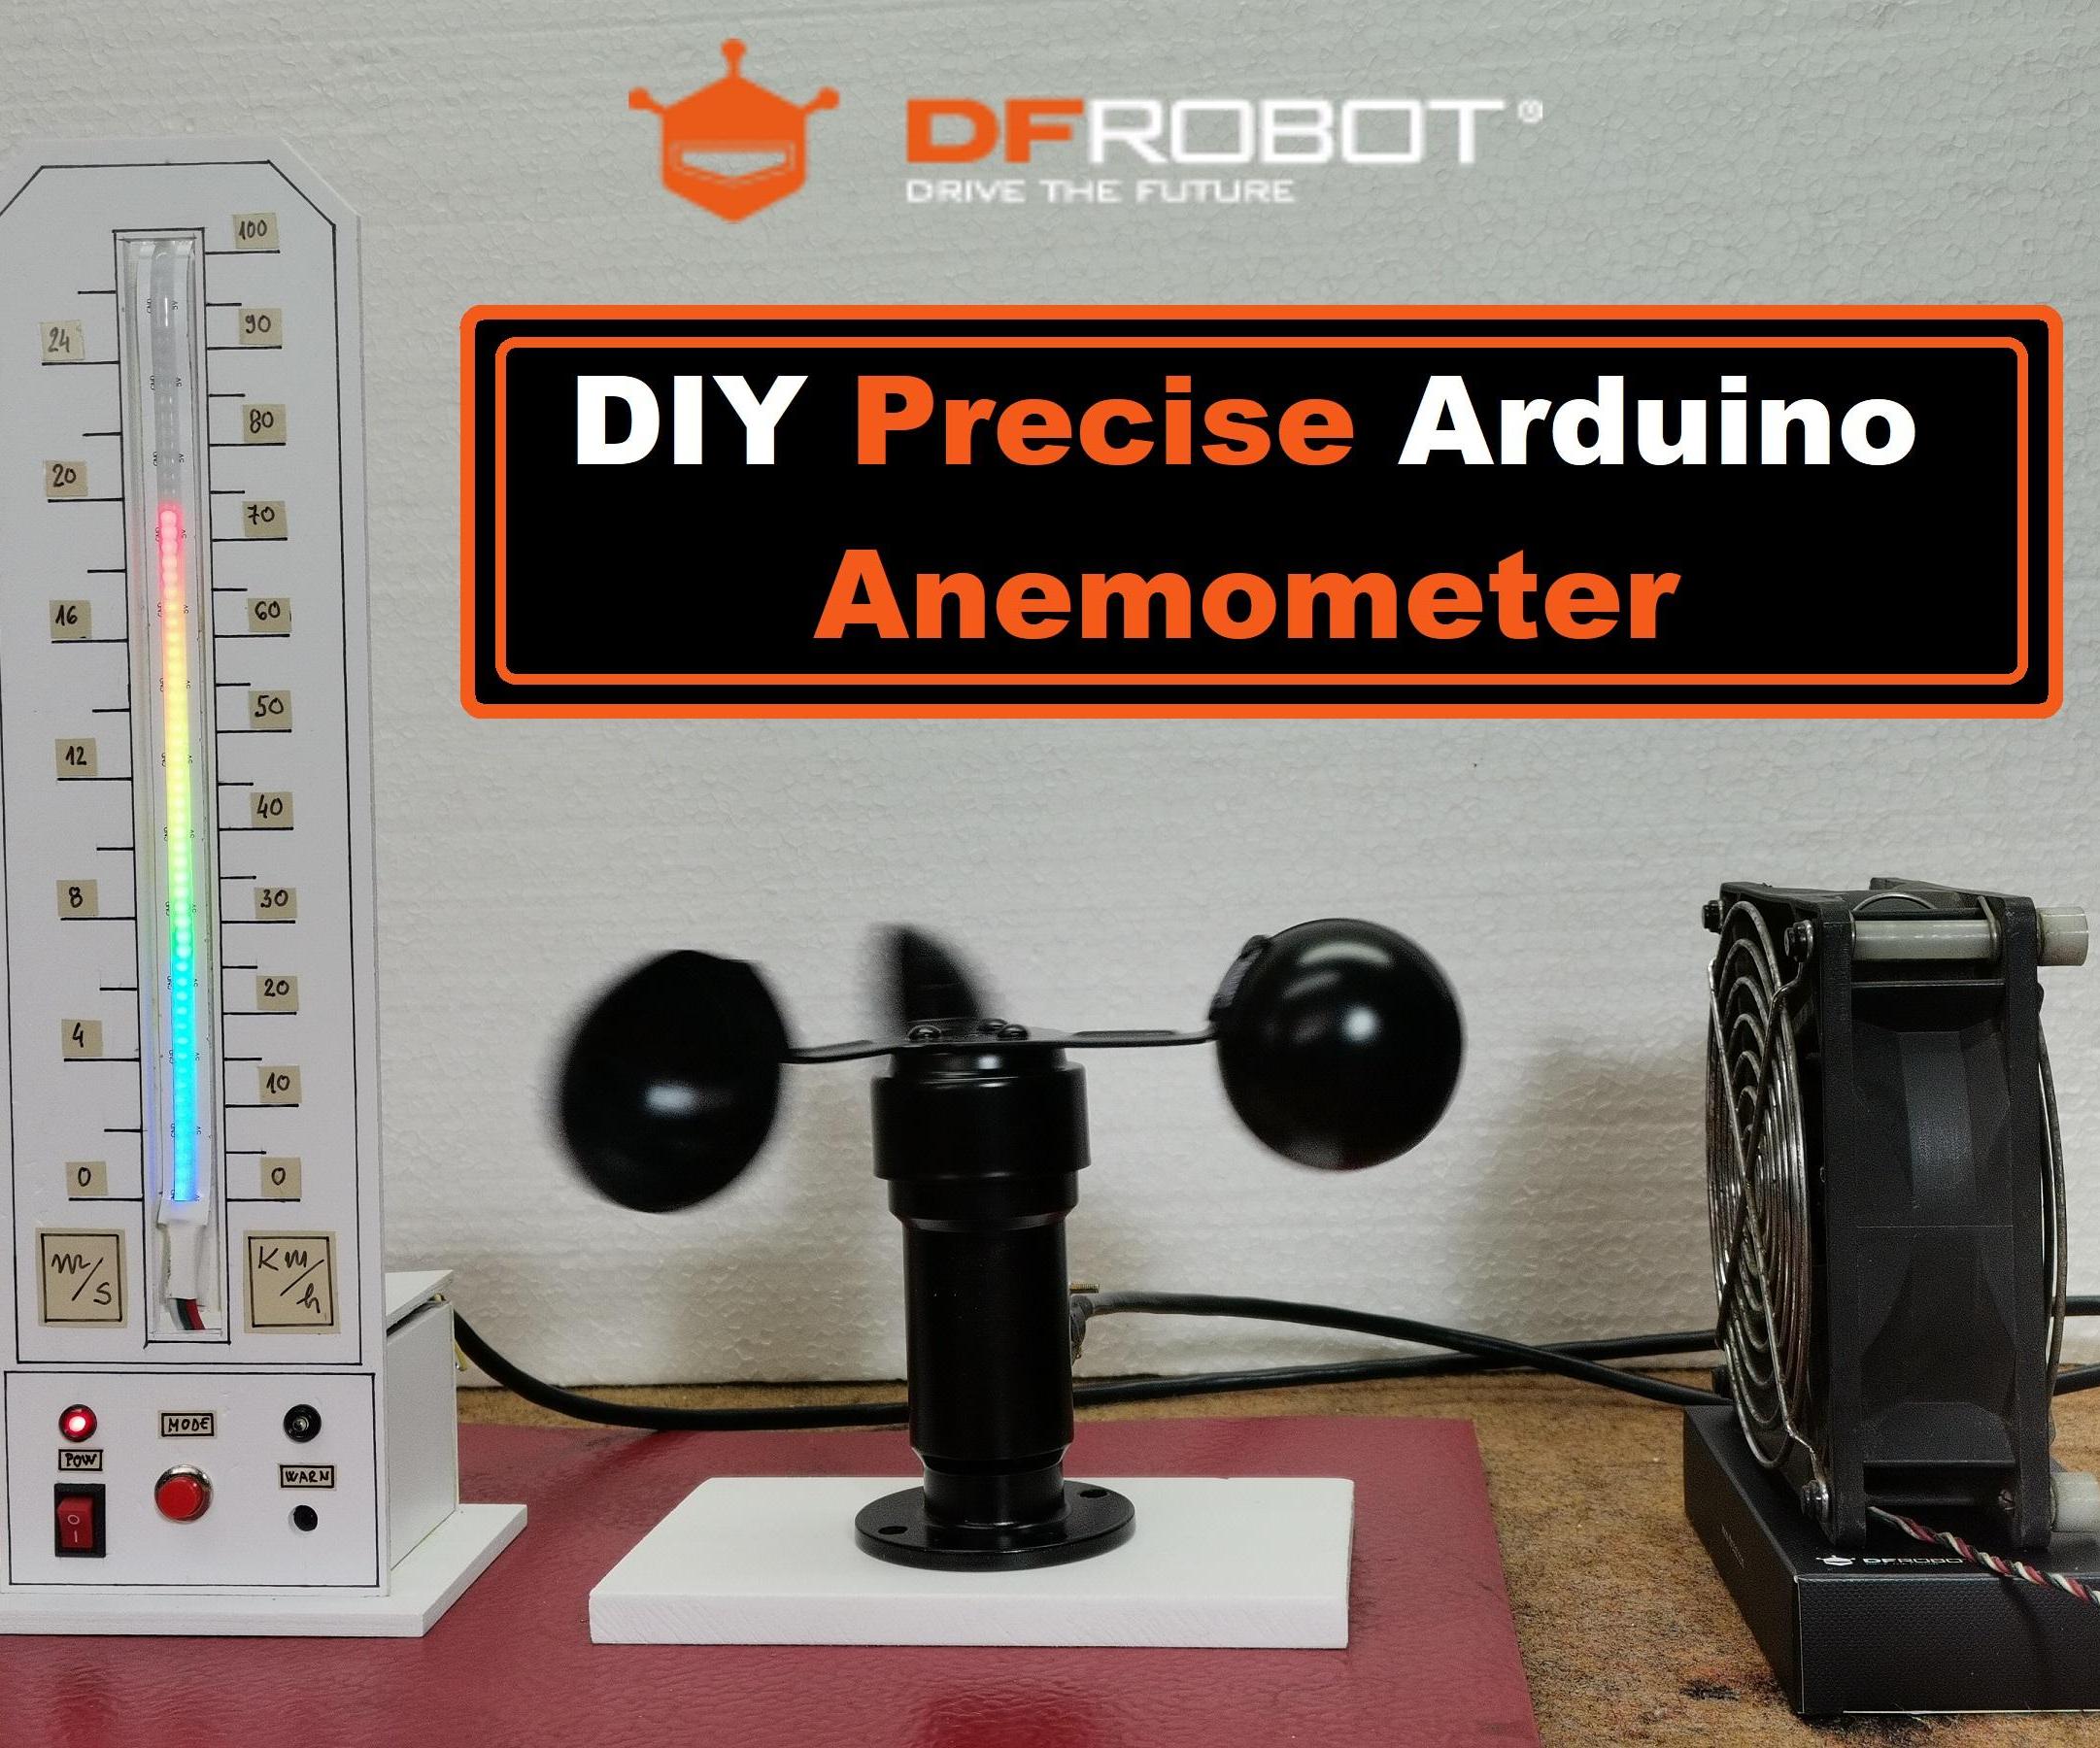 DIY Precise Arduino Anemometer With Linear Led Scale - DFRobot